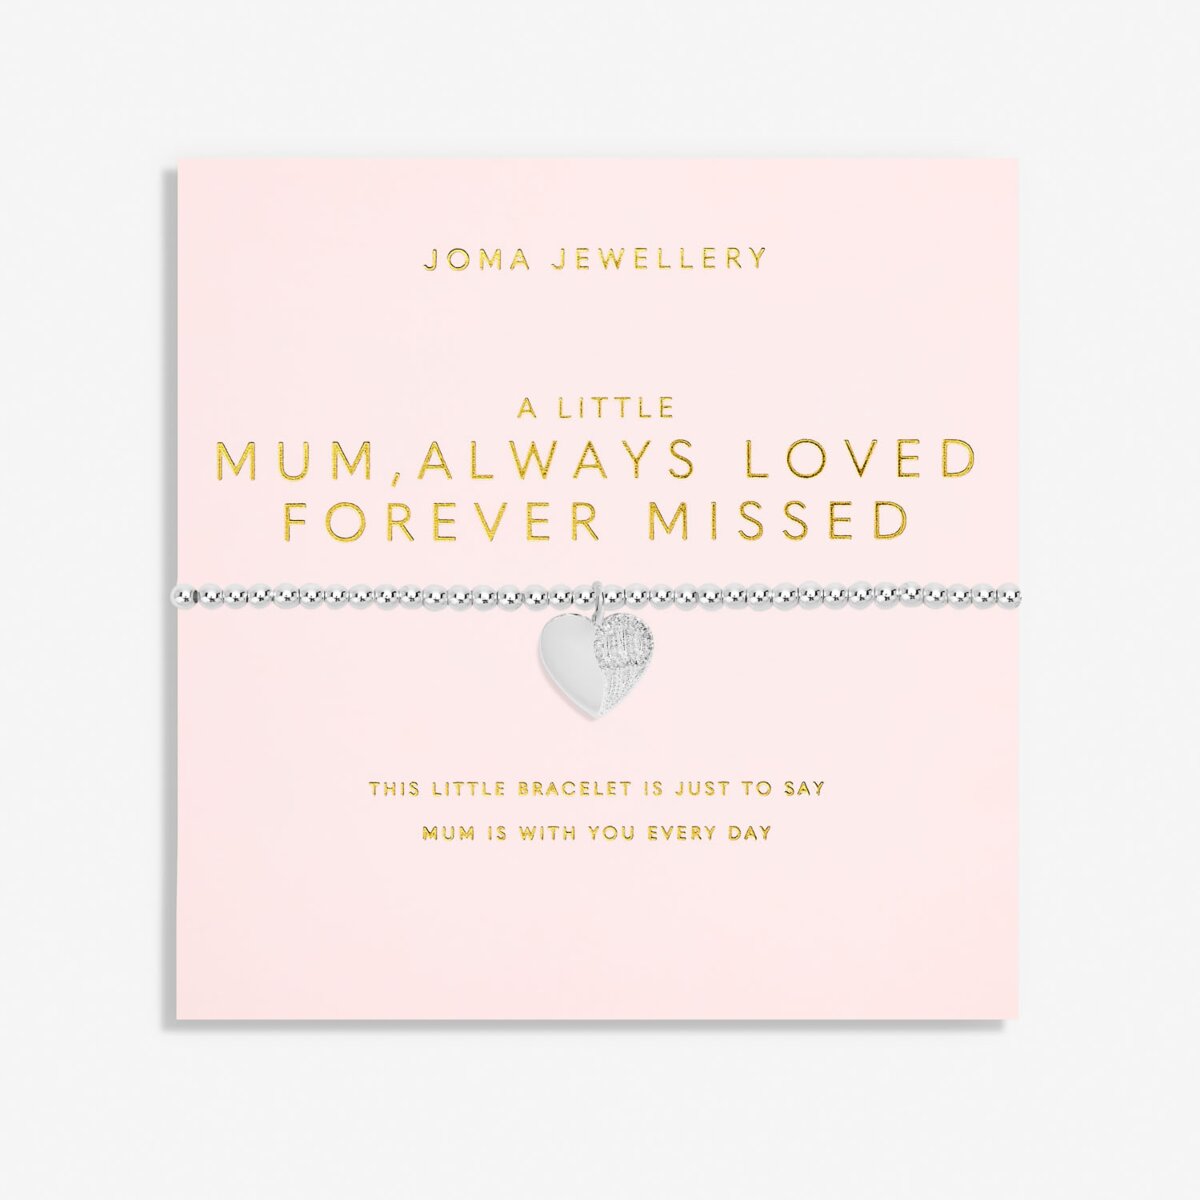 JOMA JEWELLERY | MOTHER'S DAY A LITTLE | MUM, ALWAYS LOVED FOREVER MISSEDBRACELET